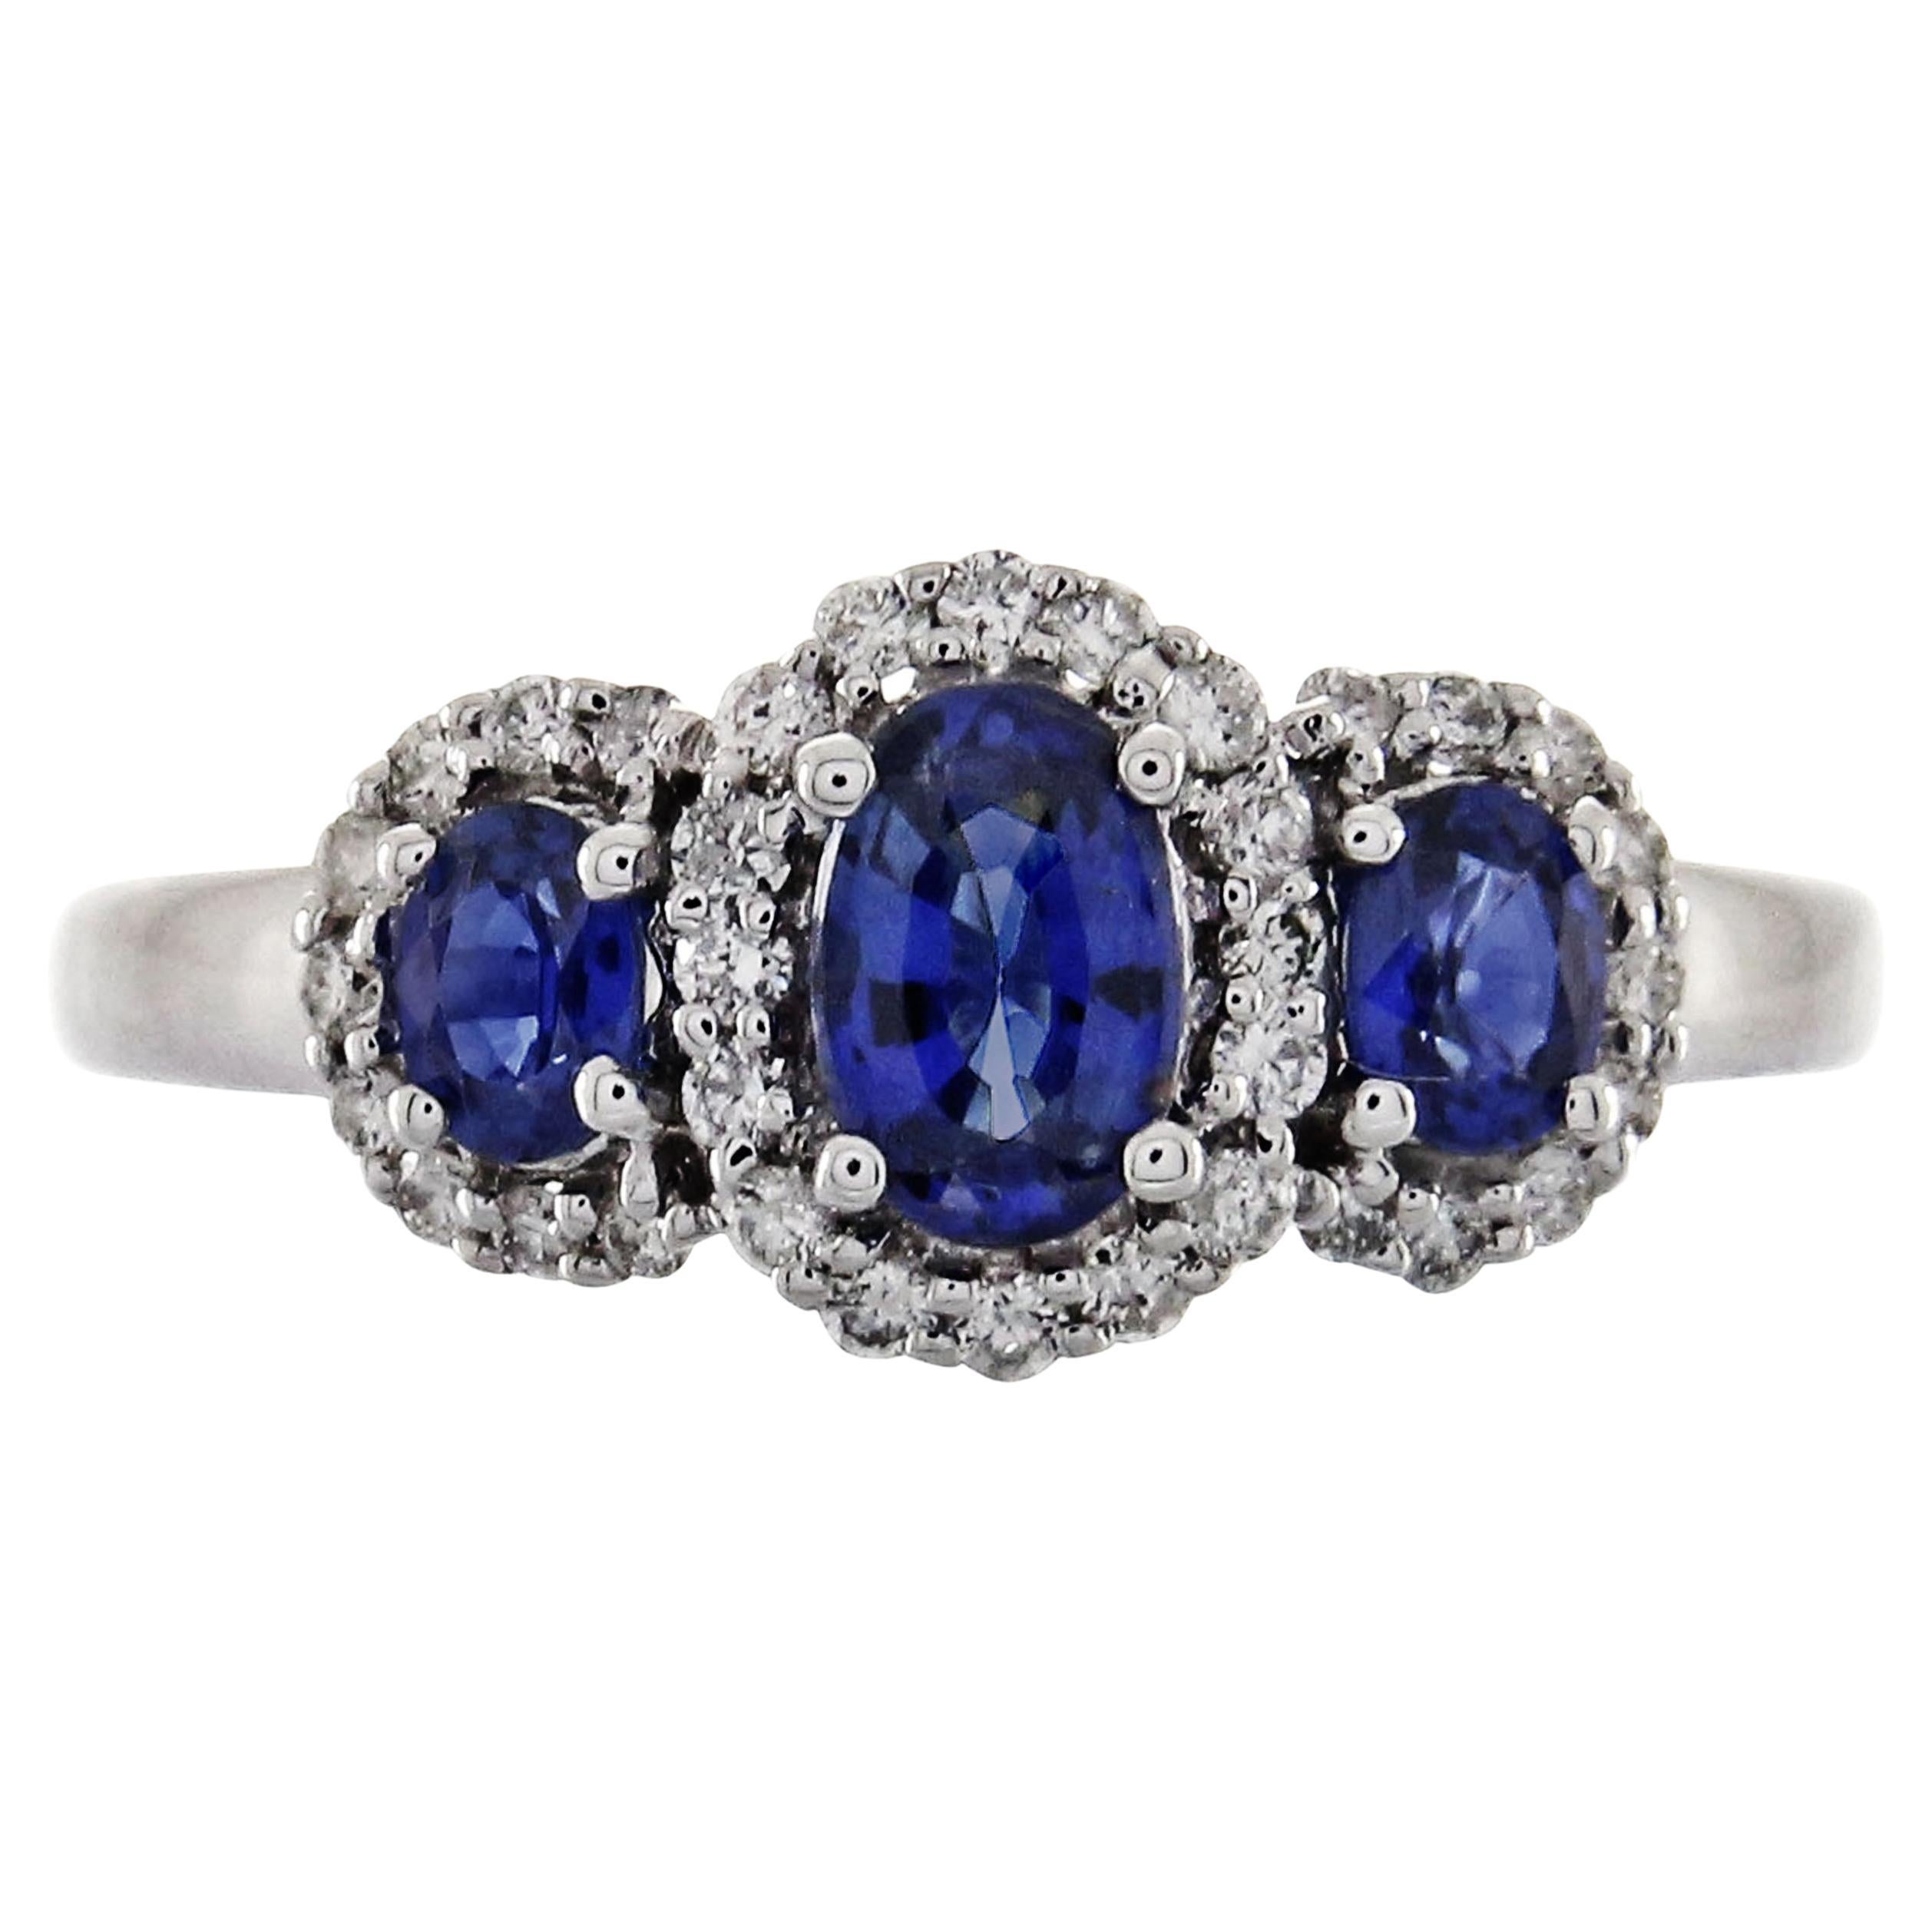 1.15 Carat Oval-Cut Blue Sapphire Diamond Accents 14K White Gold Bridal Ring For Sale